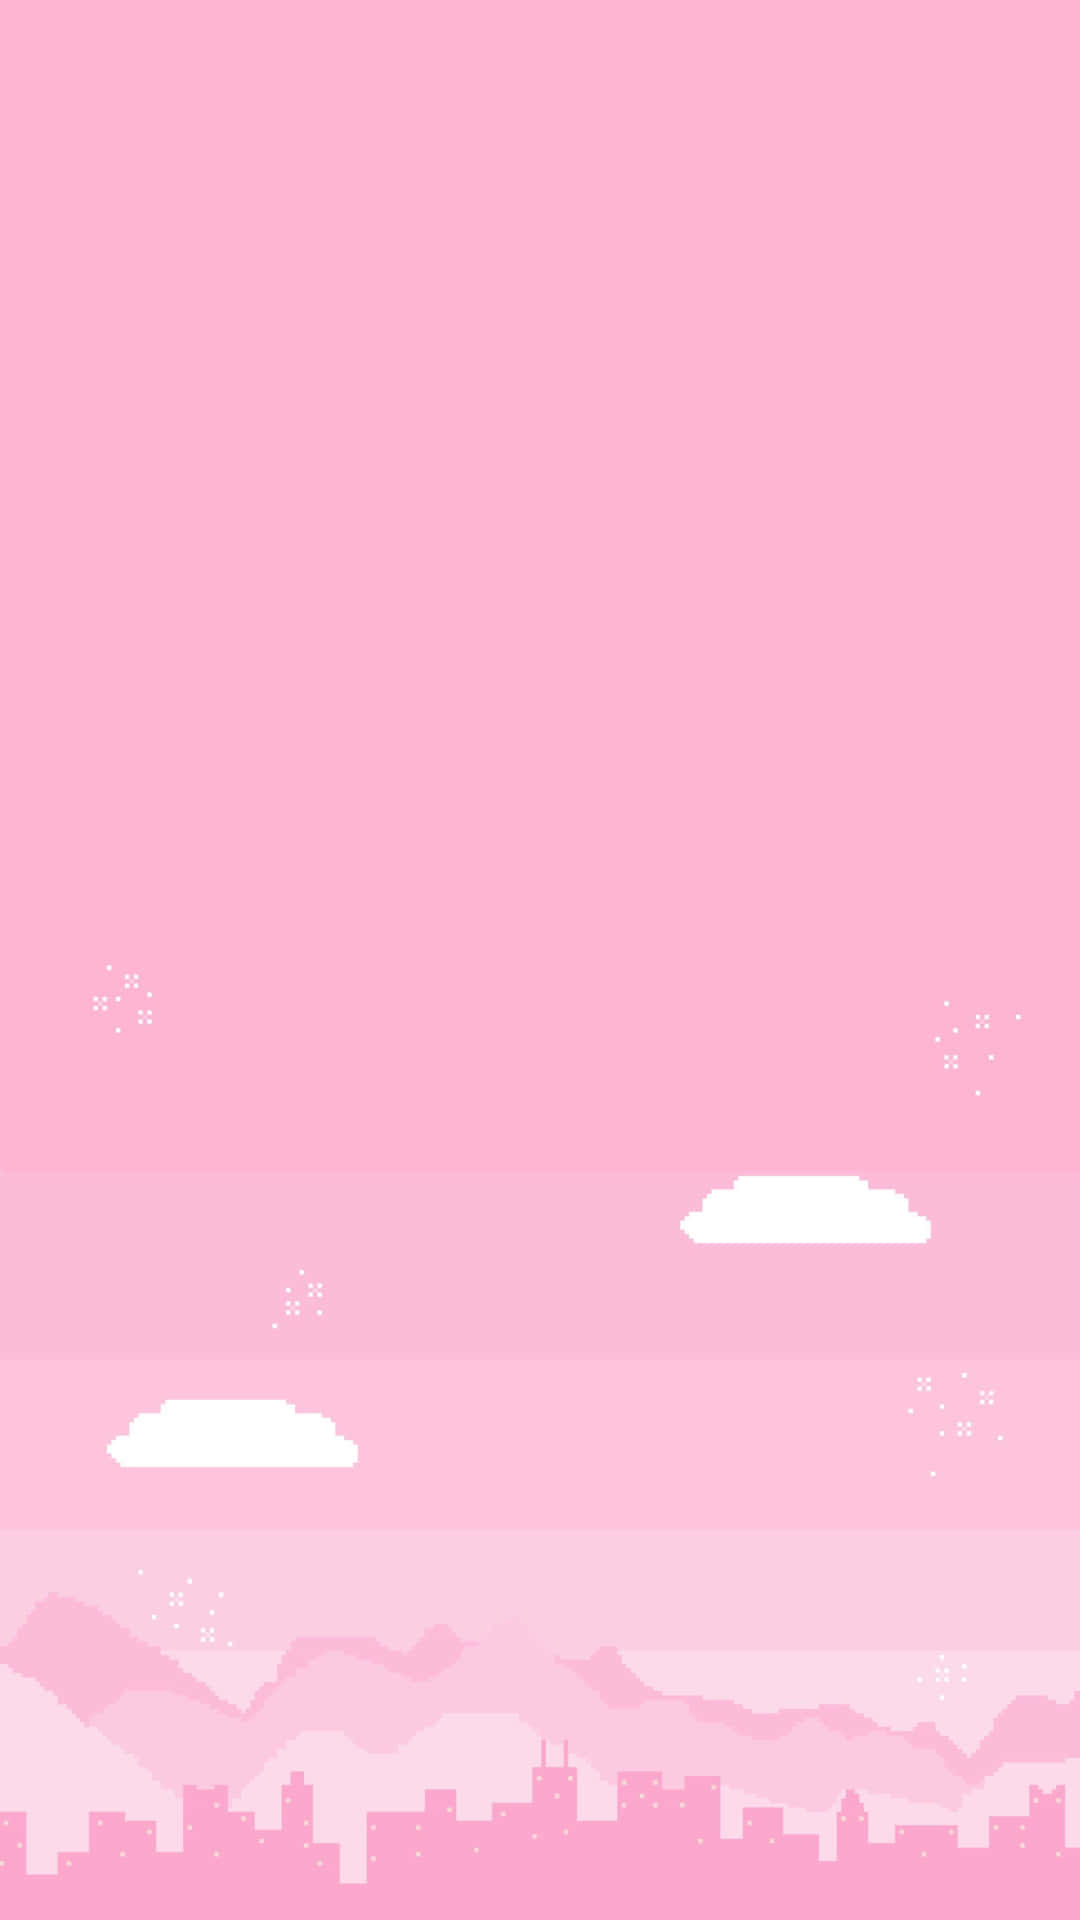 Spread love and joy with this sweet and vibrant pink background